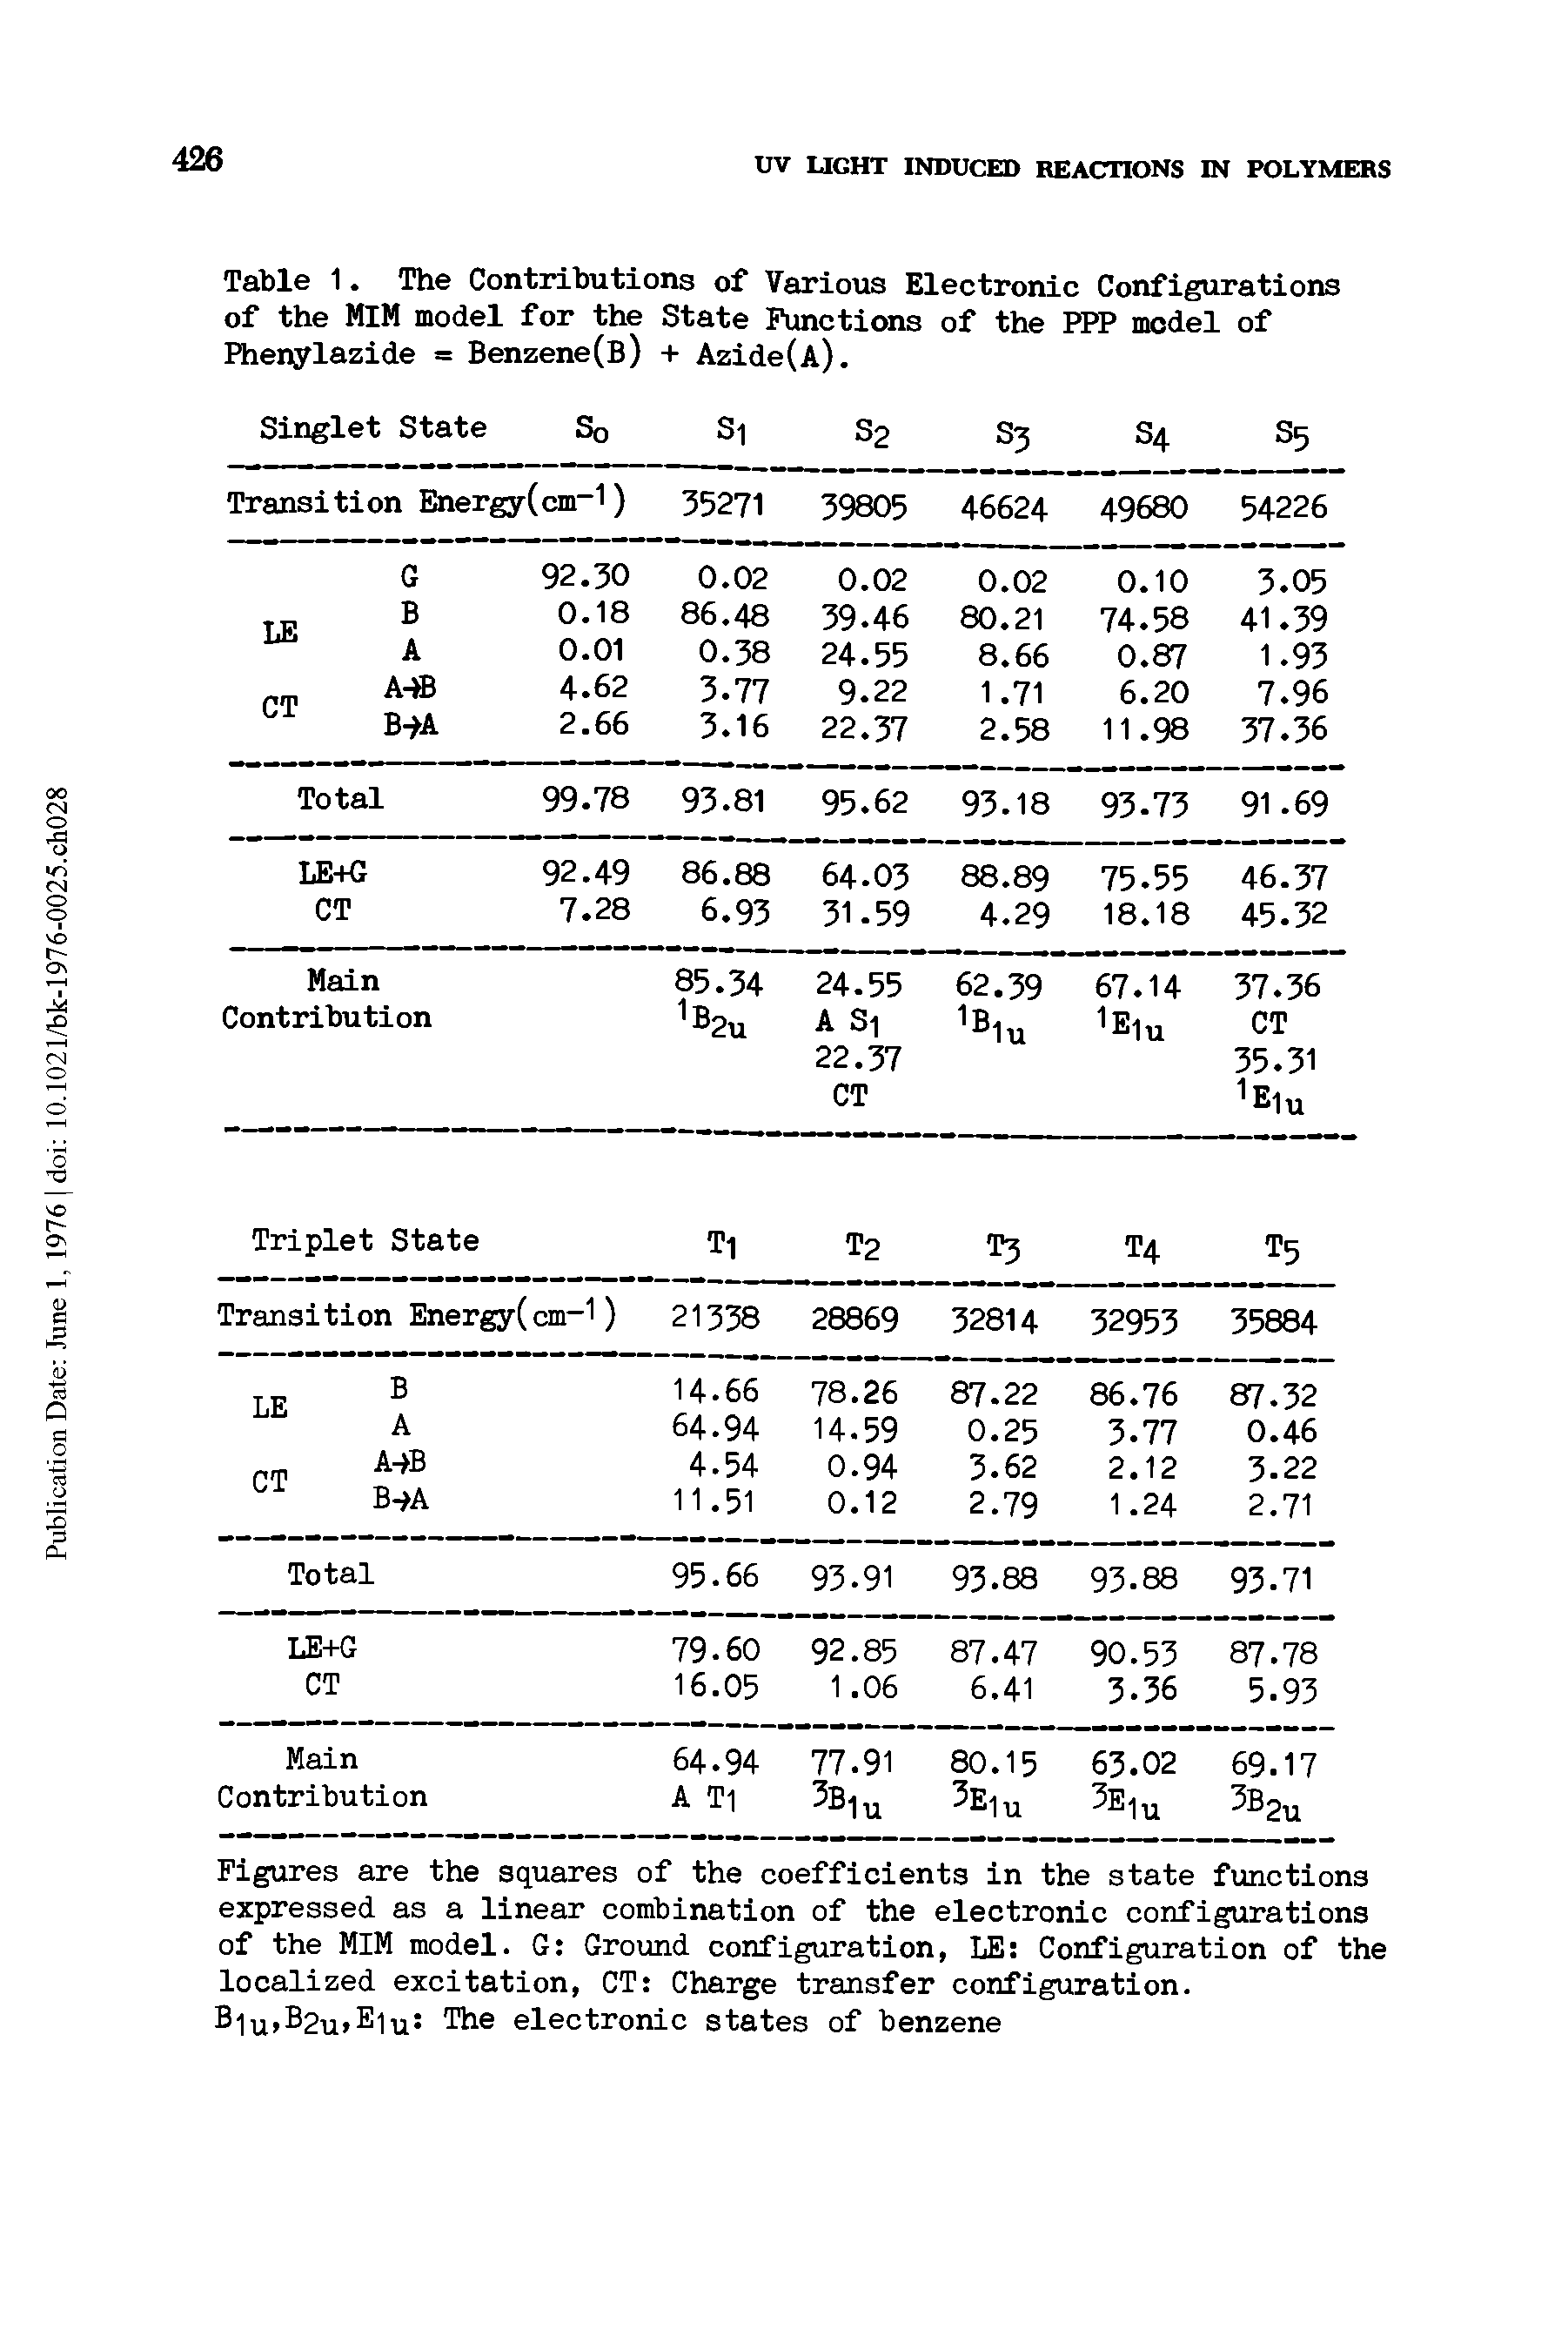 Table 1. The Contributions of Various Electronic Configurations of the MIM model for the State Functions of the PE P model of Phenylazide = Benzene(B) + Azide(A).